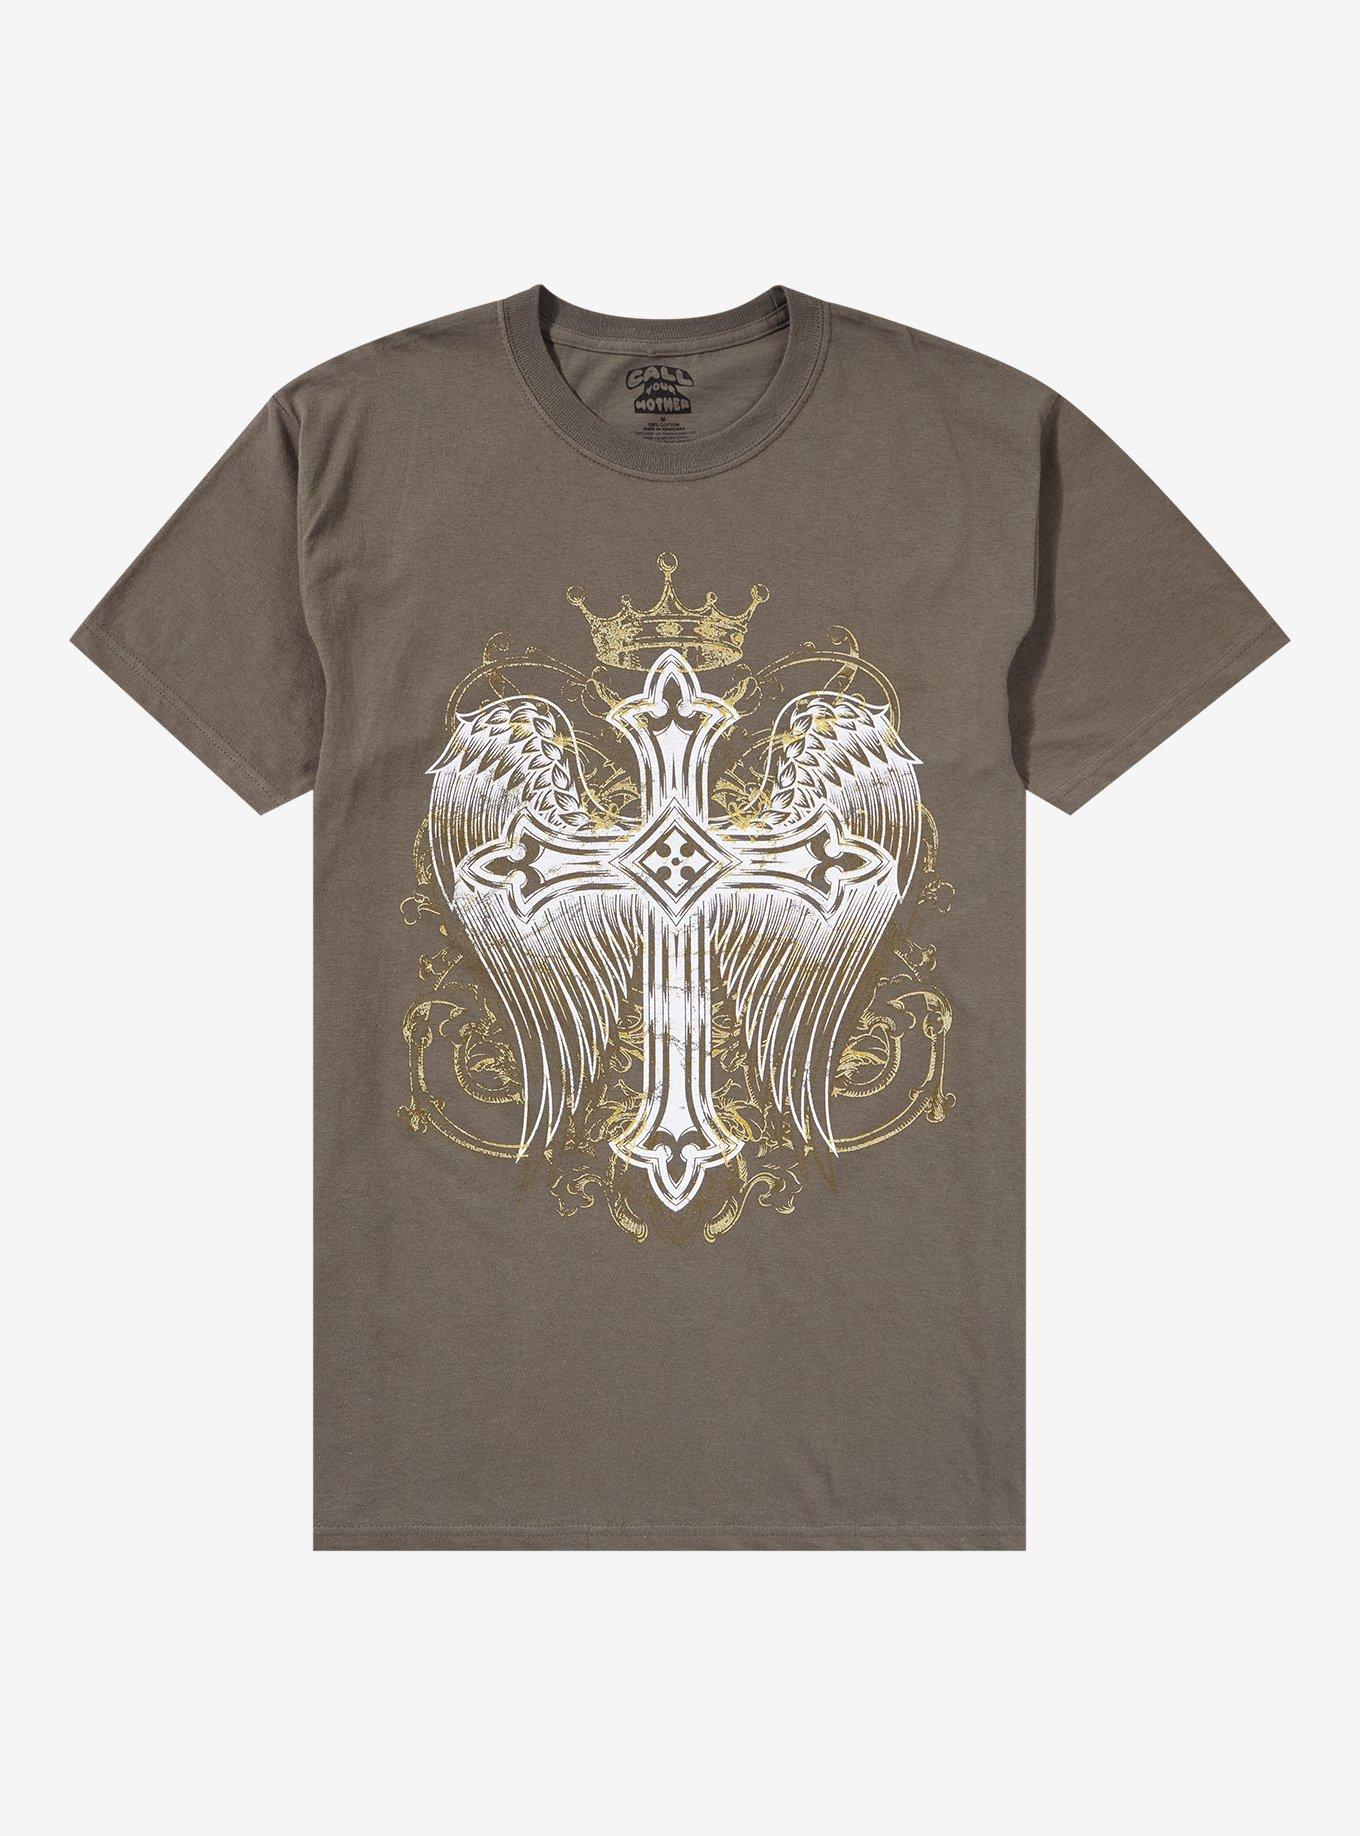 Winged Cross With Crown T-Shirt By Call Your Mother, OLIVE, hi-res